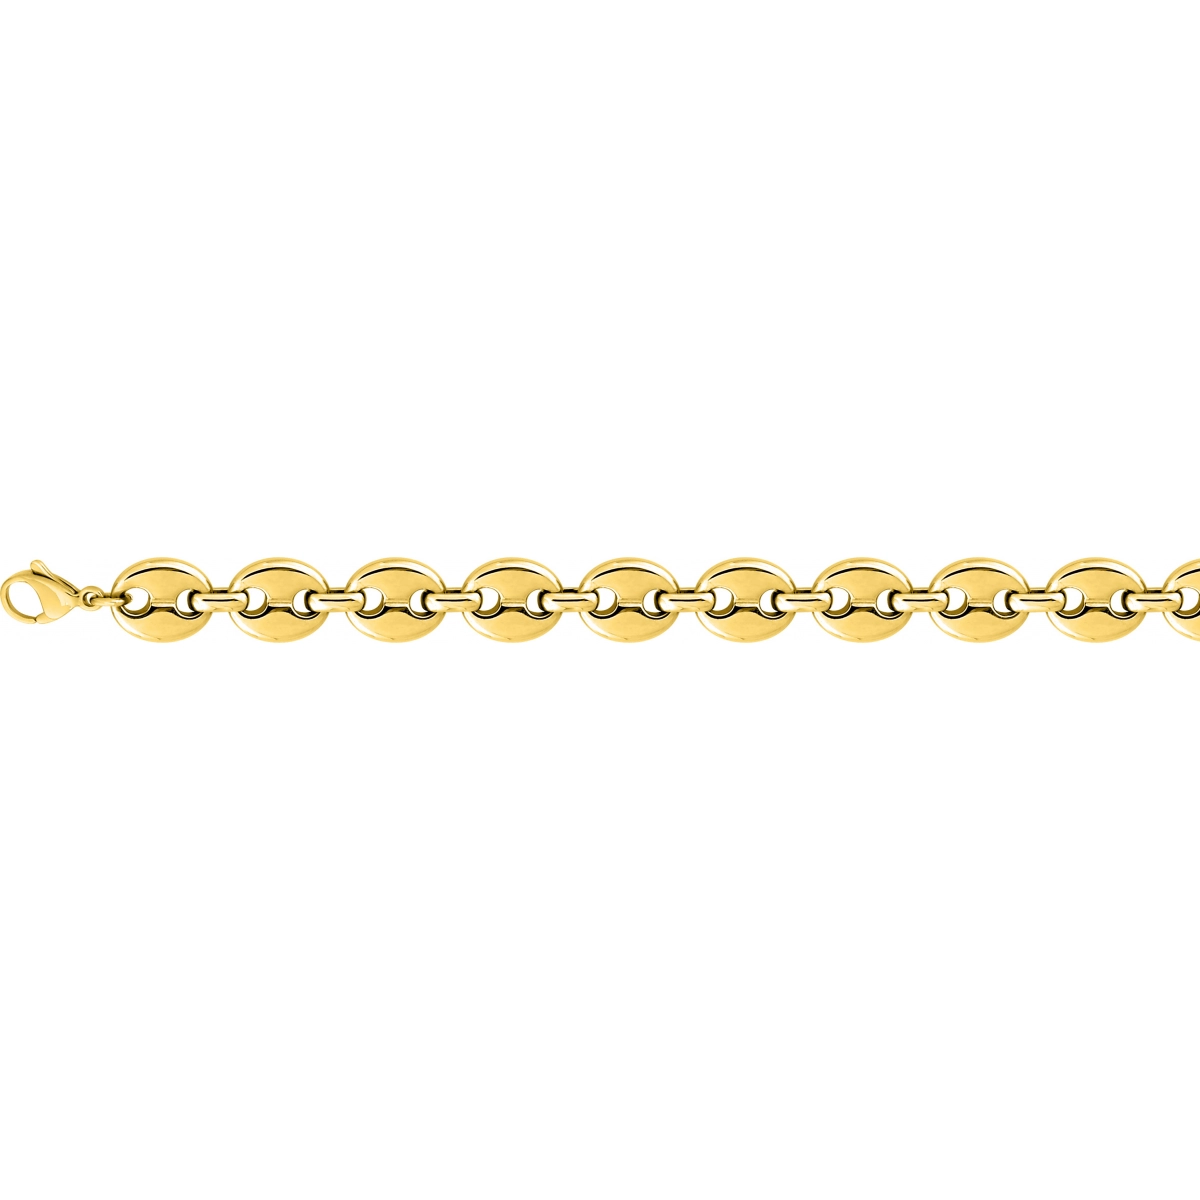 Chain gold colored Stainless Steel Lua Blanca  431102C.50